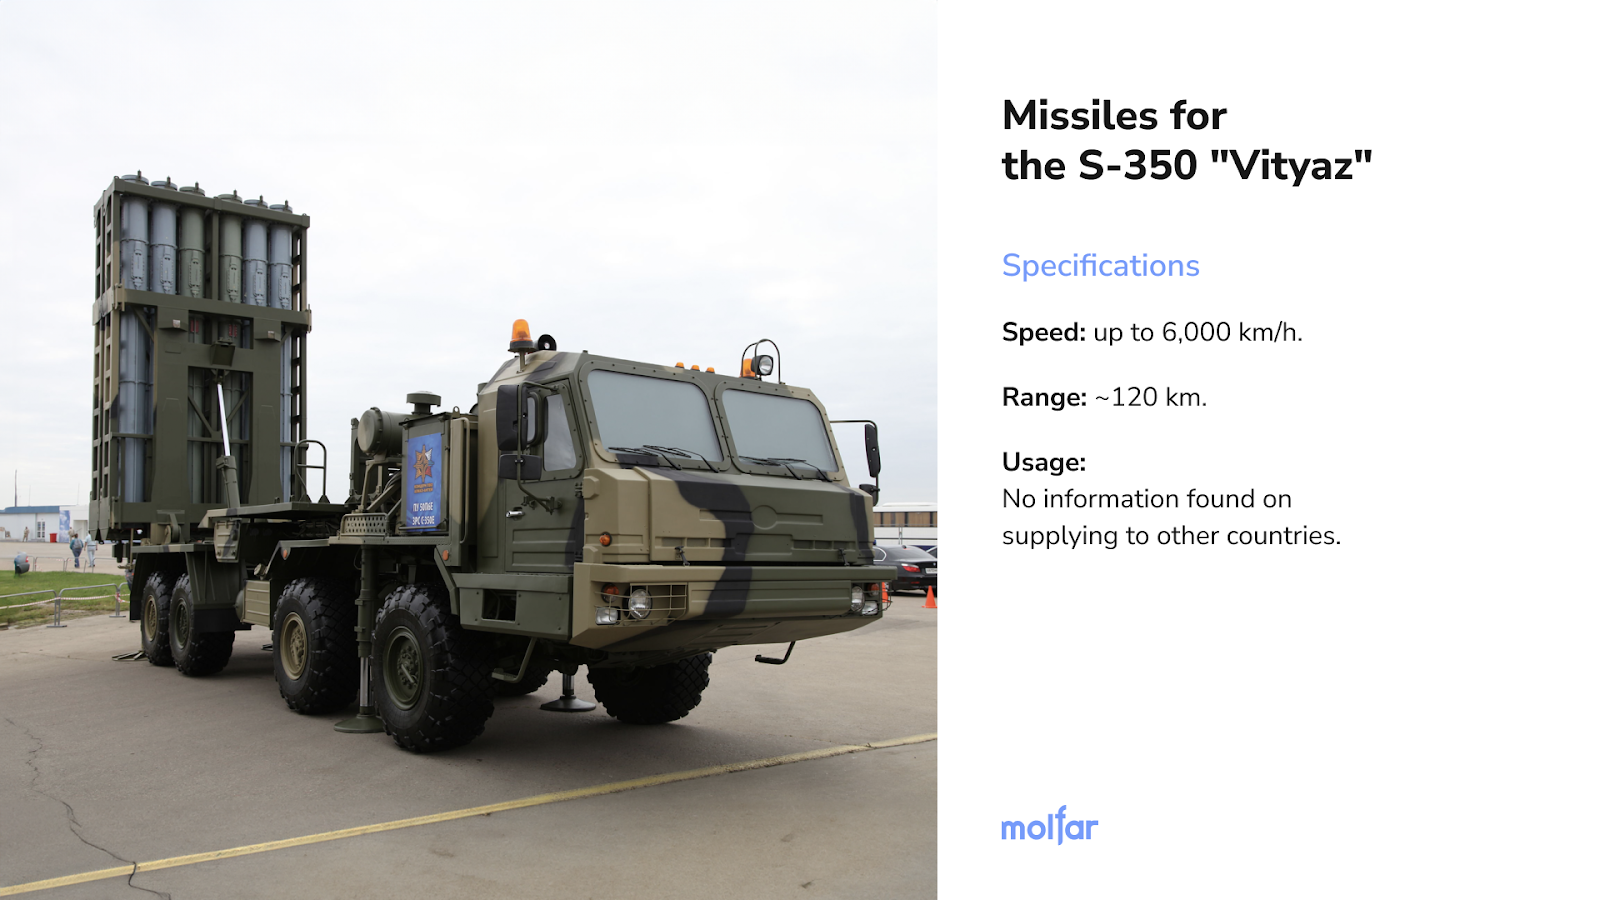 A brief description of the S-350 and a photo.